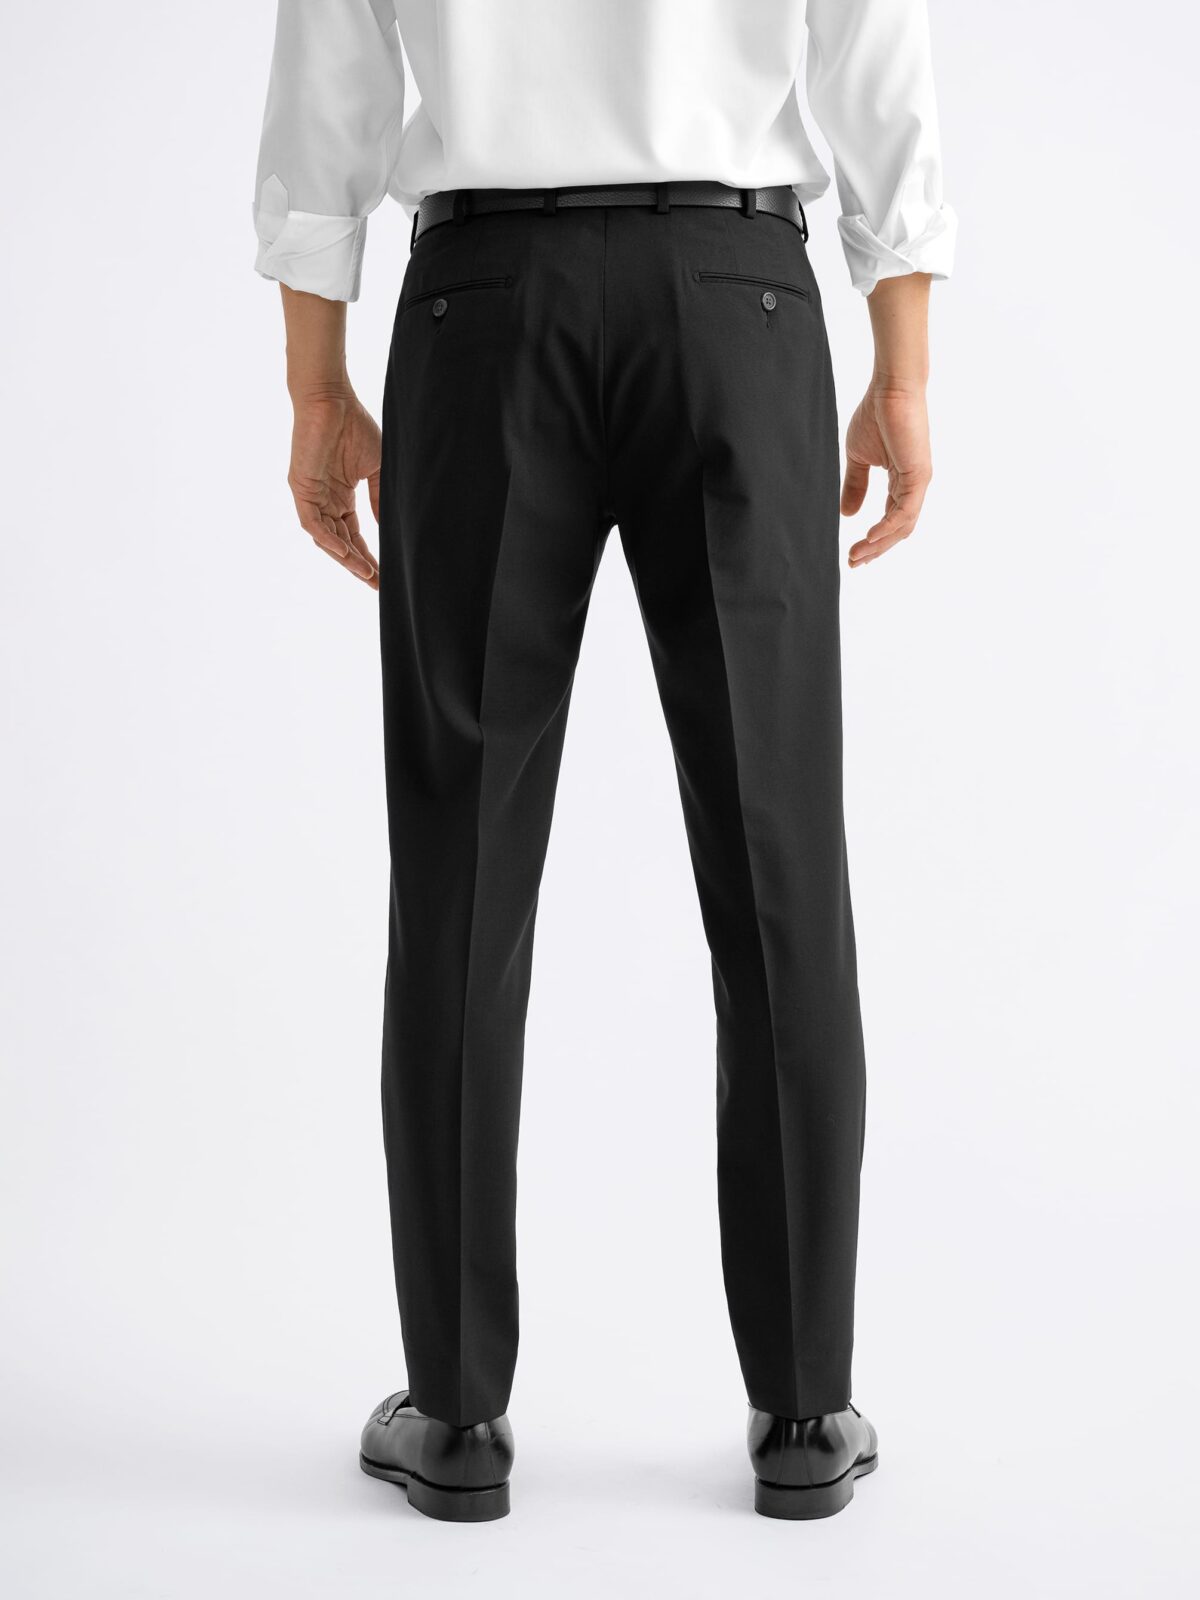 Black Wool Stretch Dress Pant - Custom Fit Tailored Clothing